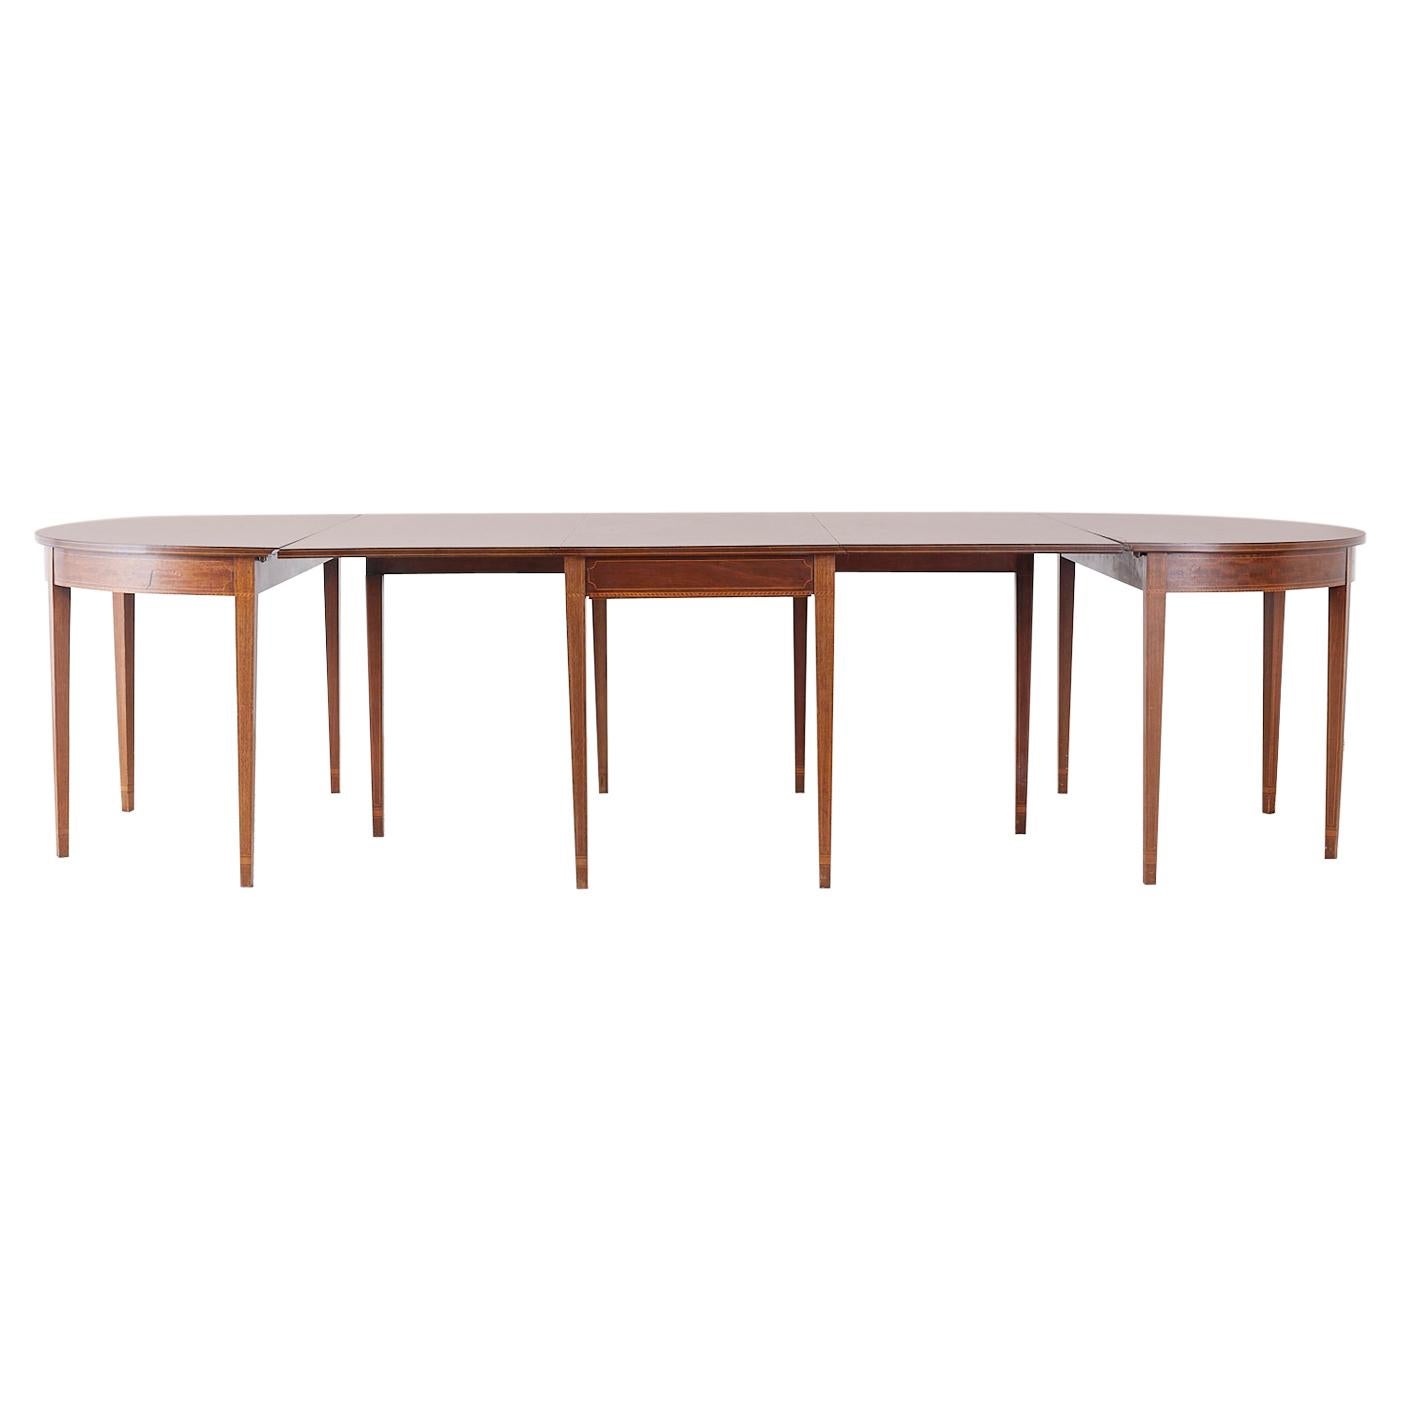 American Hepplewhite Style Mahogany Banquet Dining Table